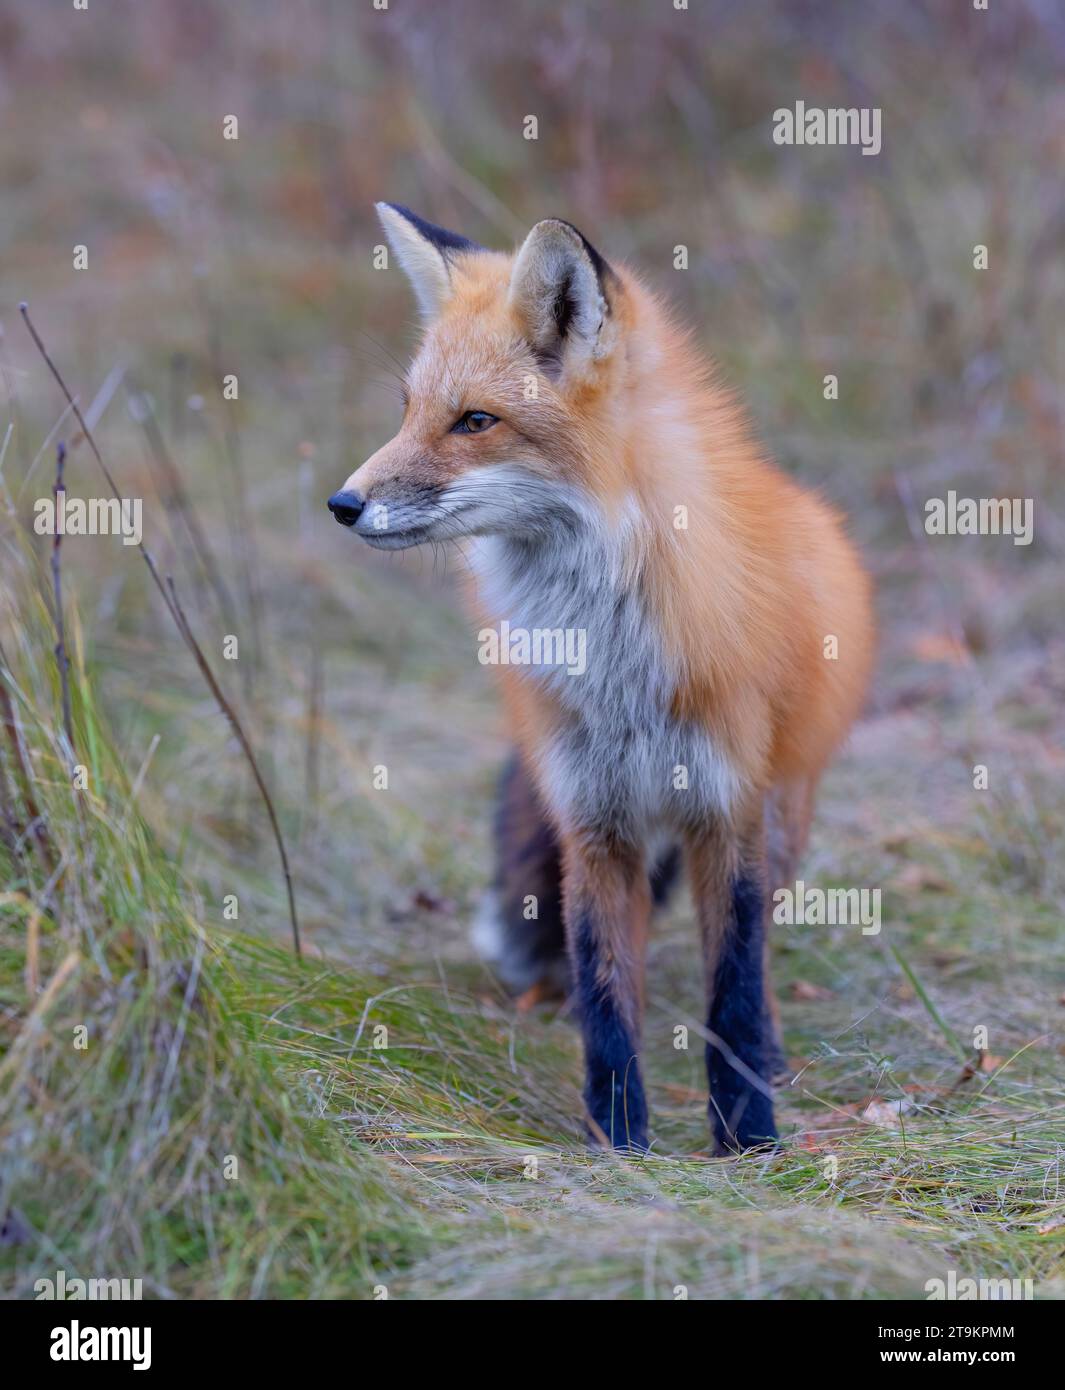 A young red fox with a beautiful tail walking through a grassy meadow in autumn. Stock Photo